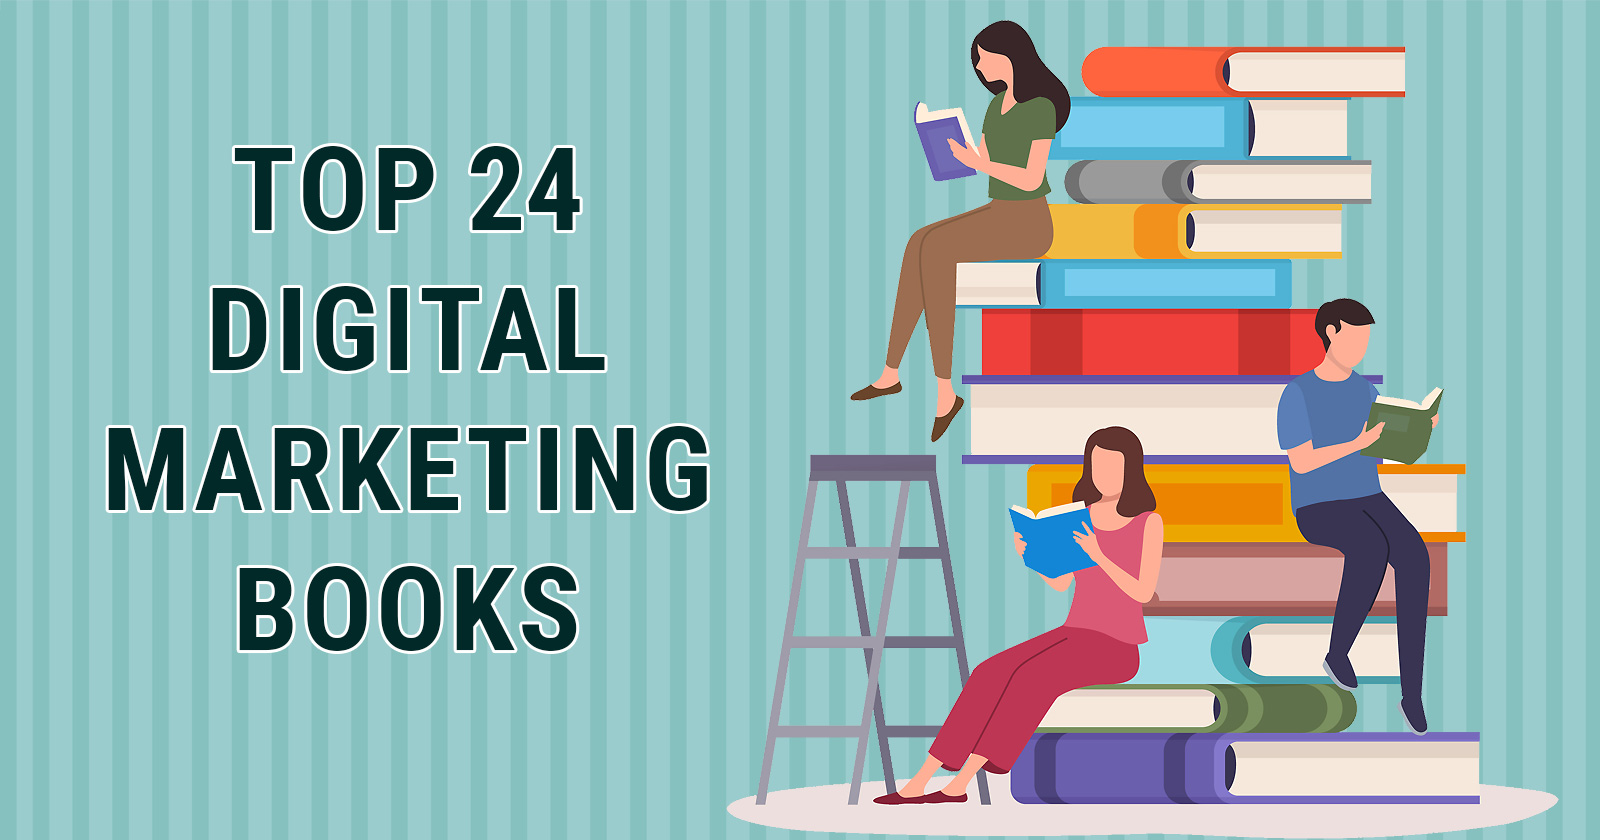 Top 24 Digital Marketing Books Every Marketer Should Read